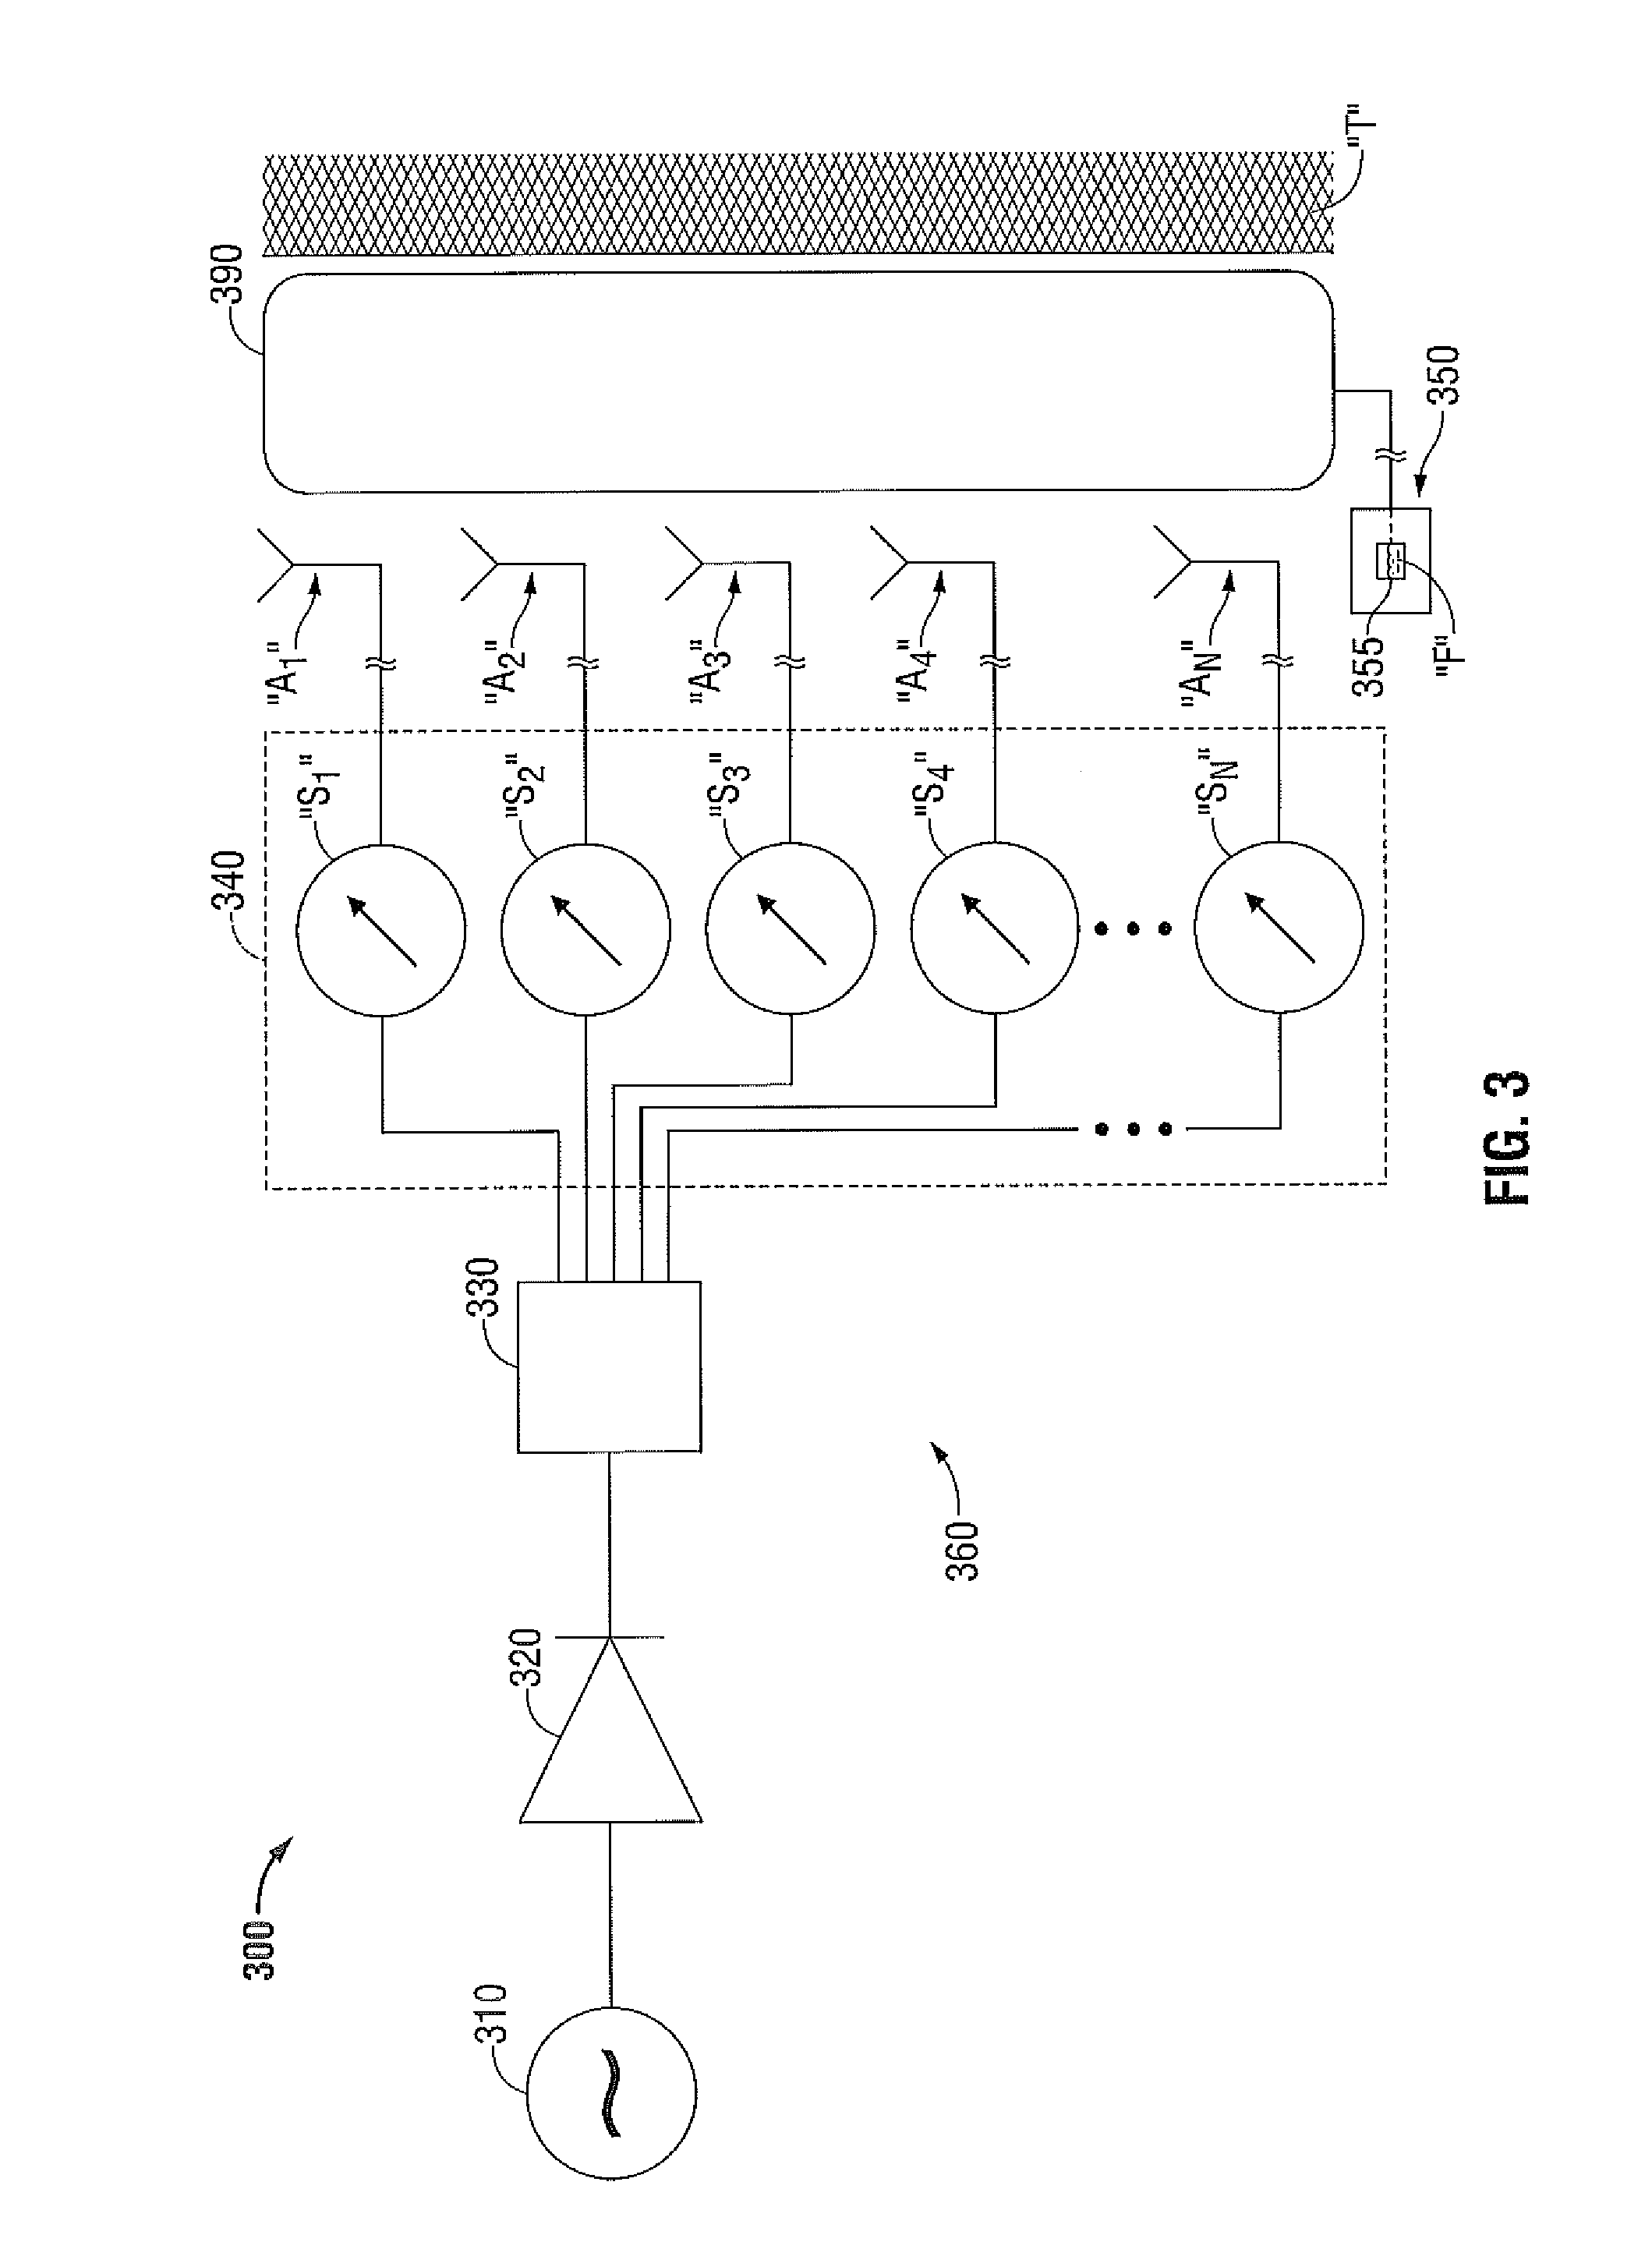 Energy-delivery device including ultrasound transducer array and phased antenna array